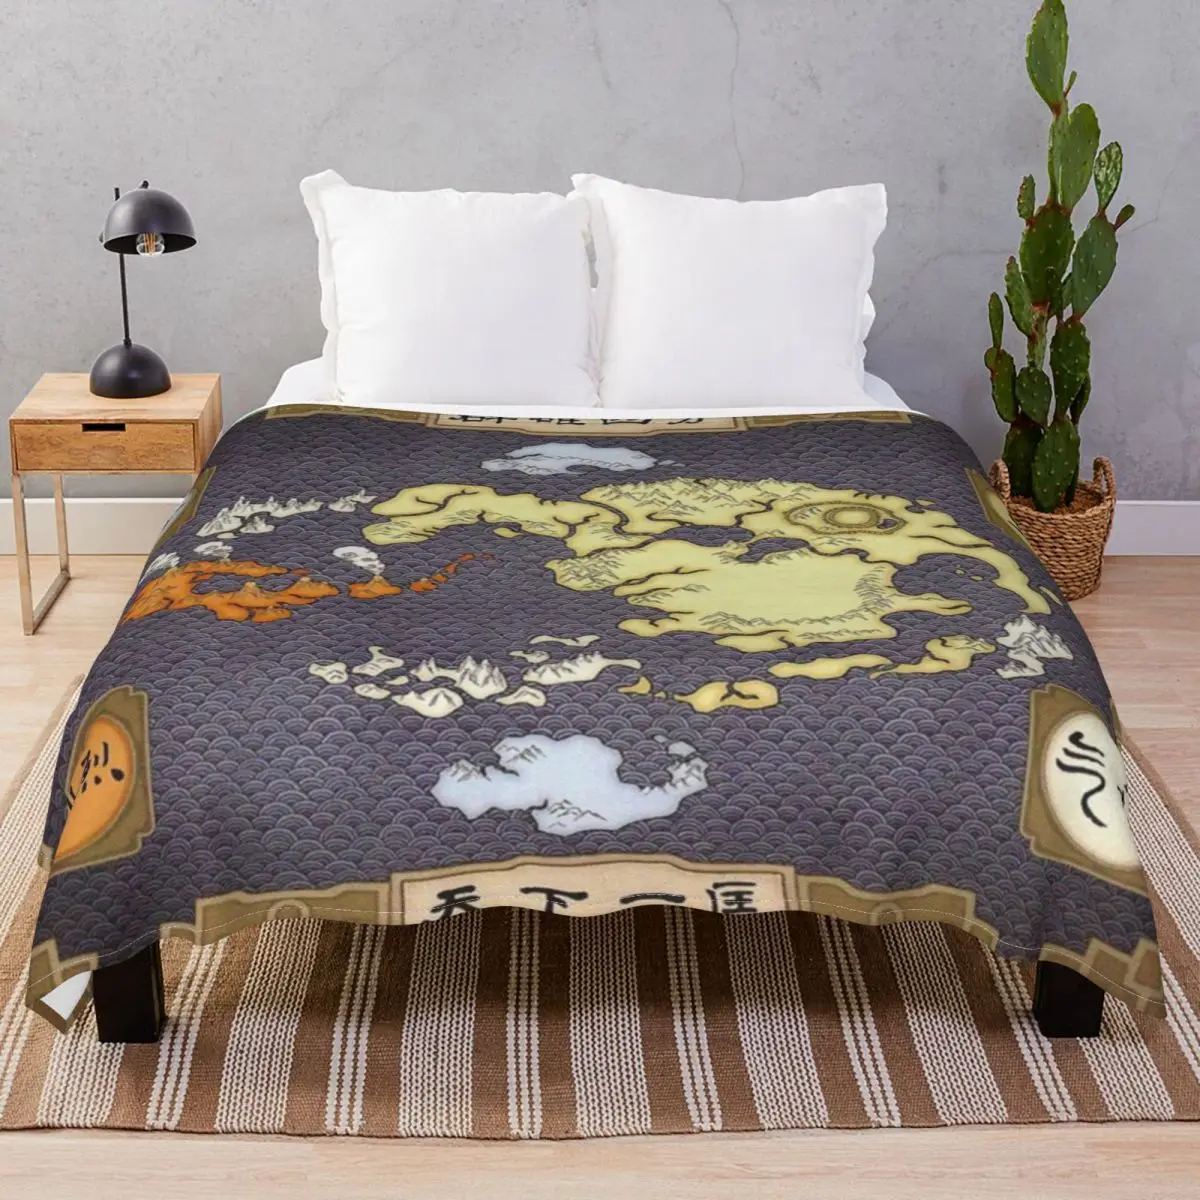 Avatar The Last Airbender Map Blankets Flannel Plush Print Multifunction Throw Blanket for Bed Home Couch Travel Office